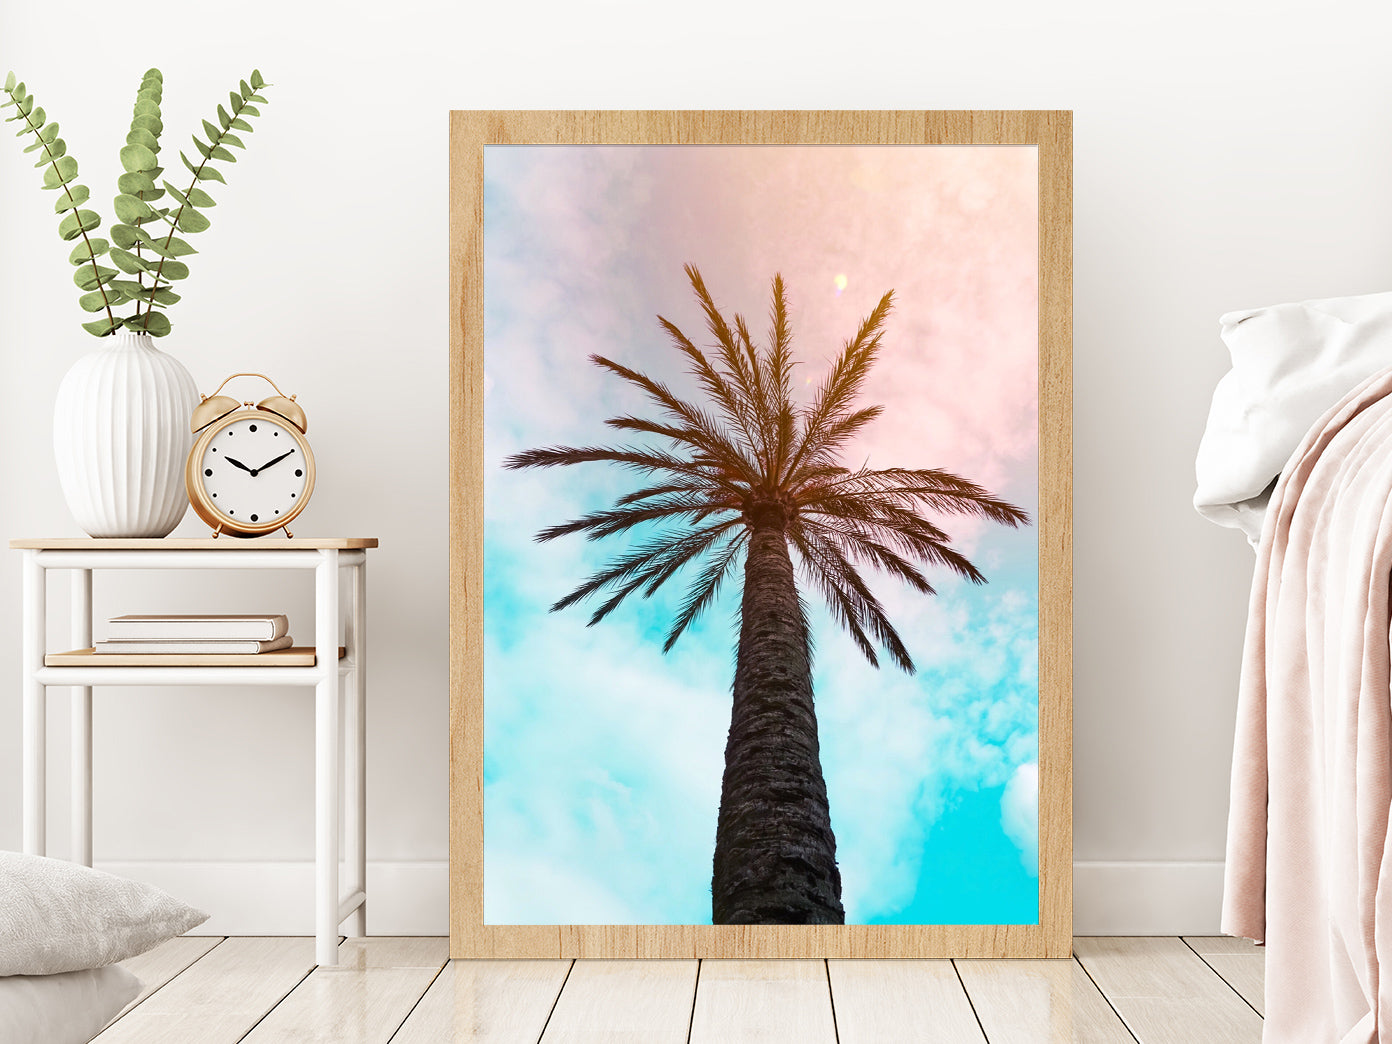 Palm Trees & Blue Pink Sky Scenery Photograph Glass Framed Wall Art, Ready to Hang Quality Print Without White Border Oak